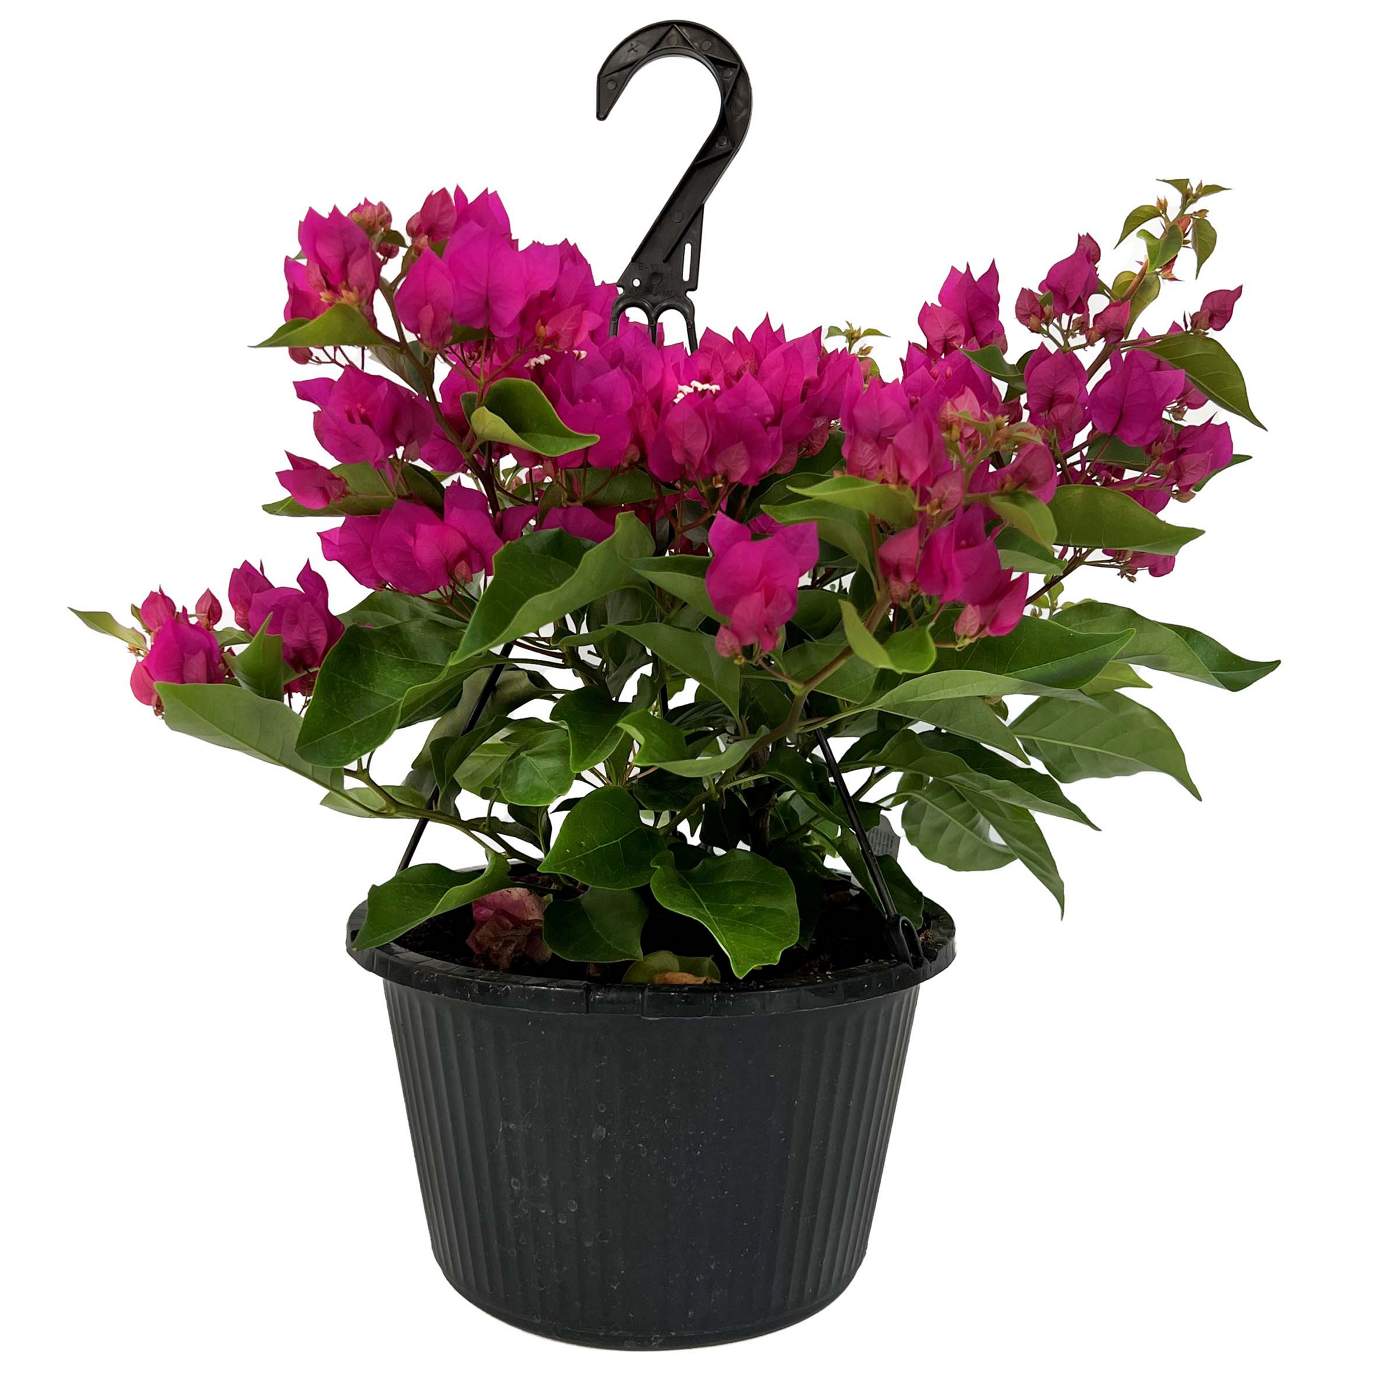 H-E-B Texas Roots Bougainvillea Hanging Basket; image 1 of 3